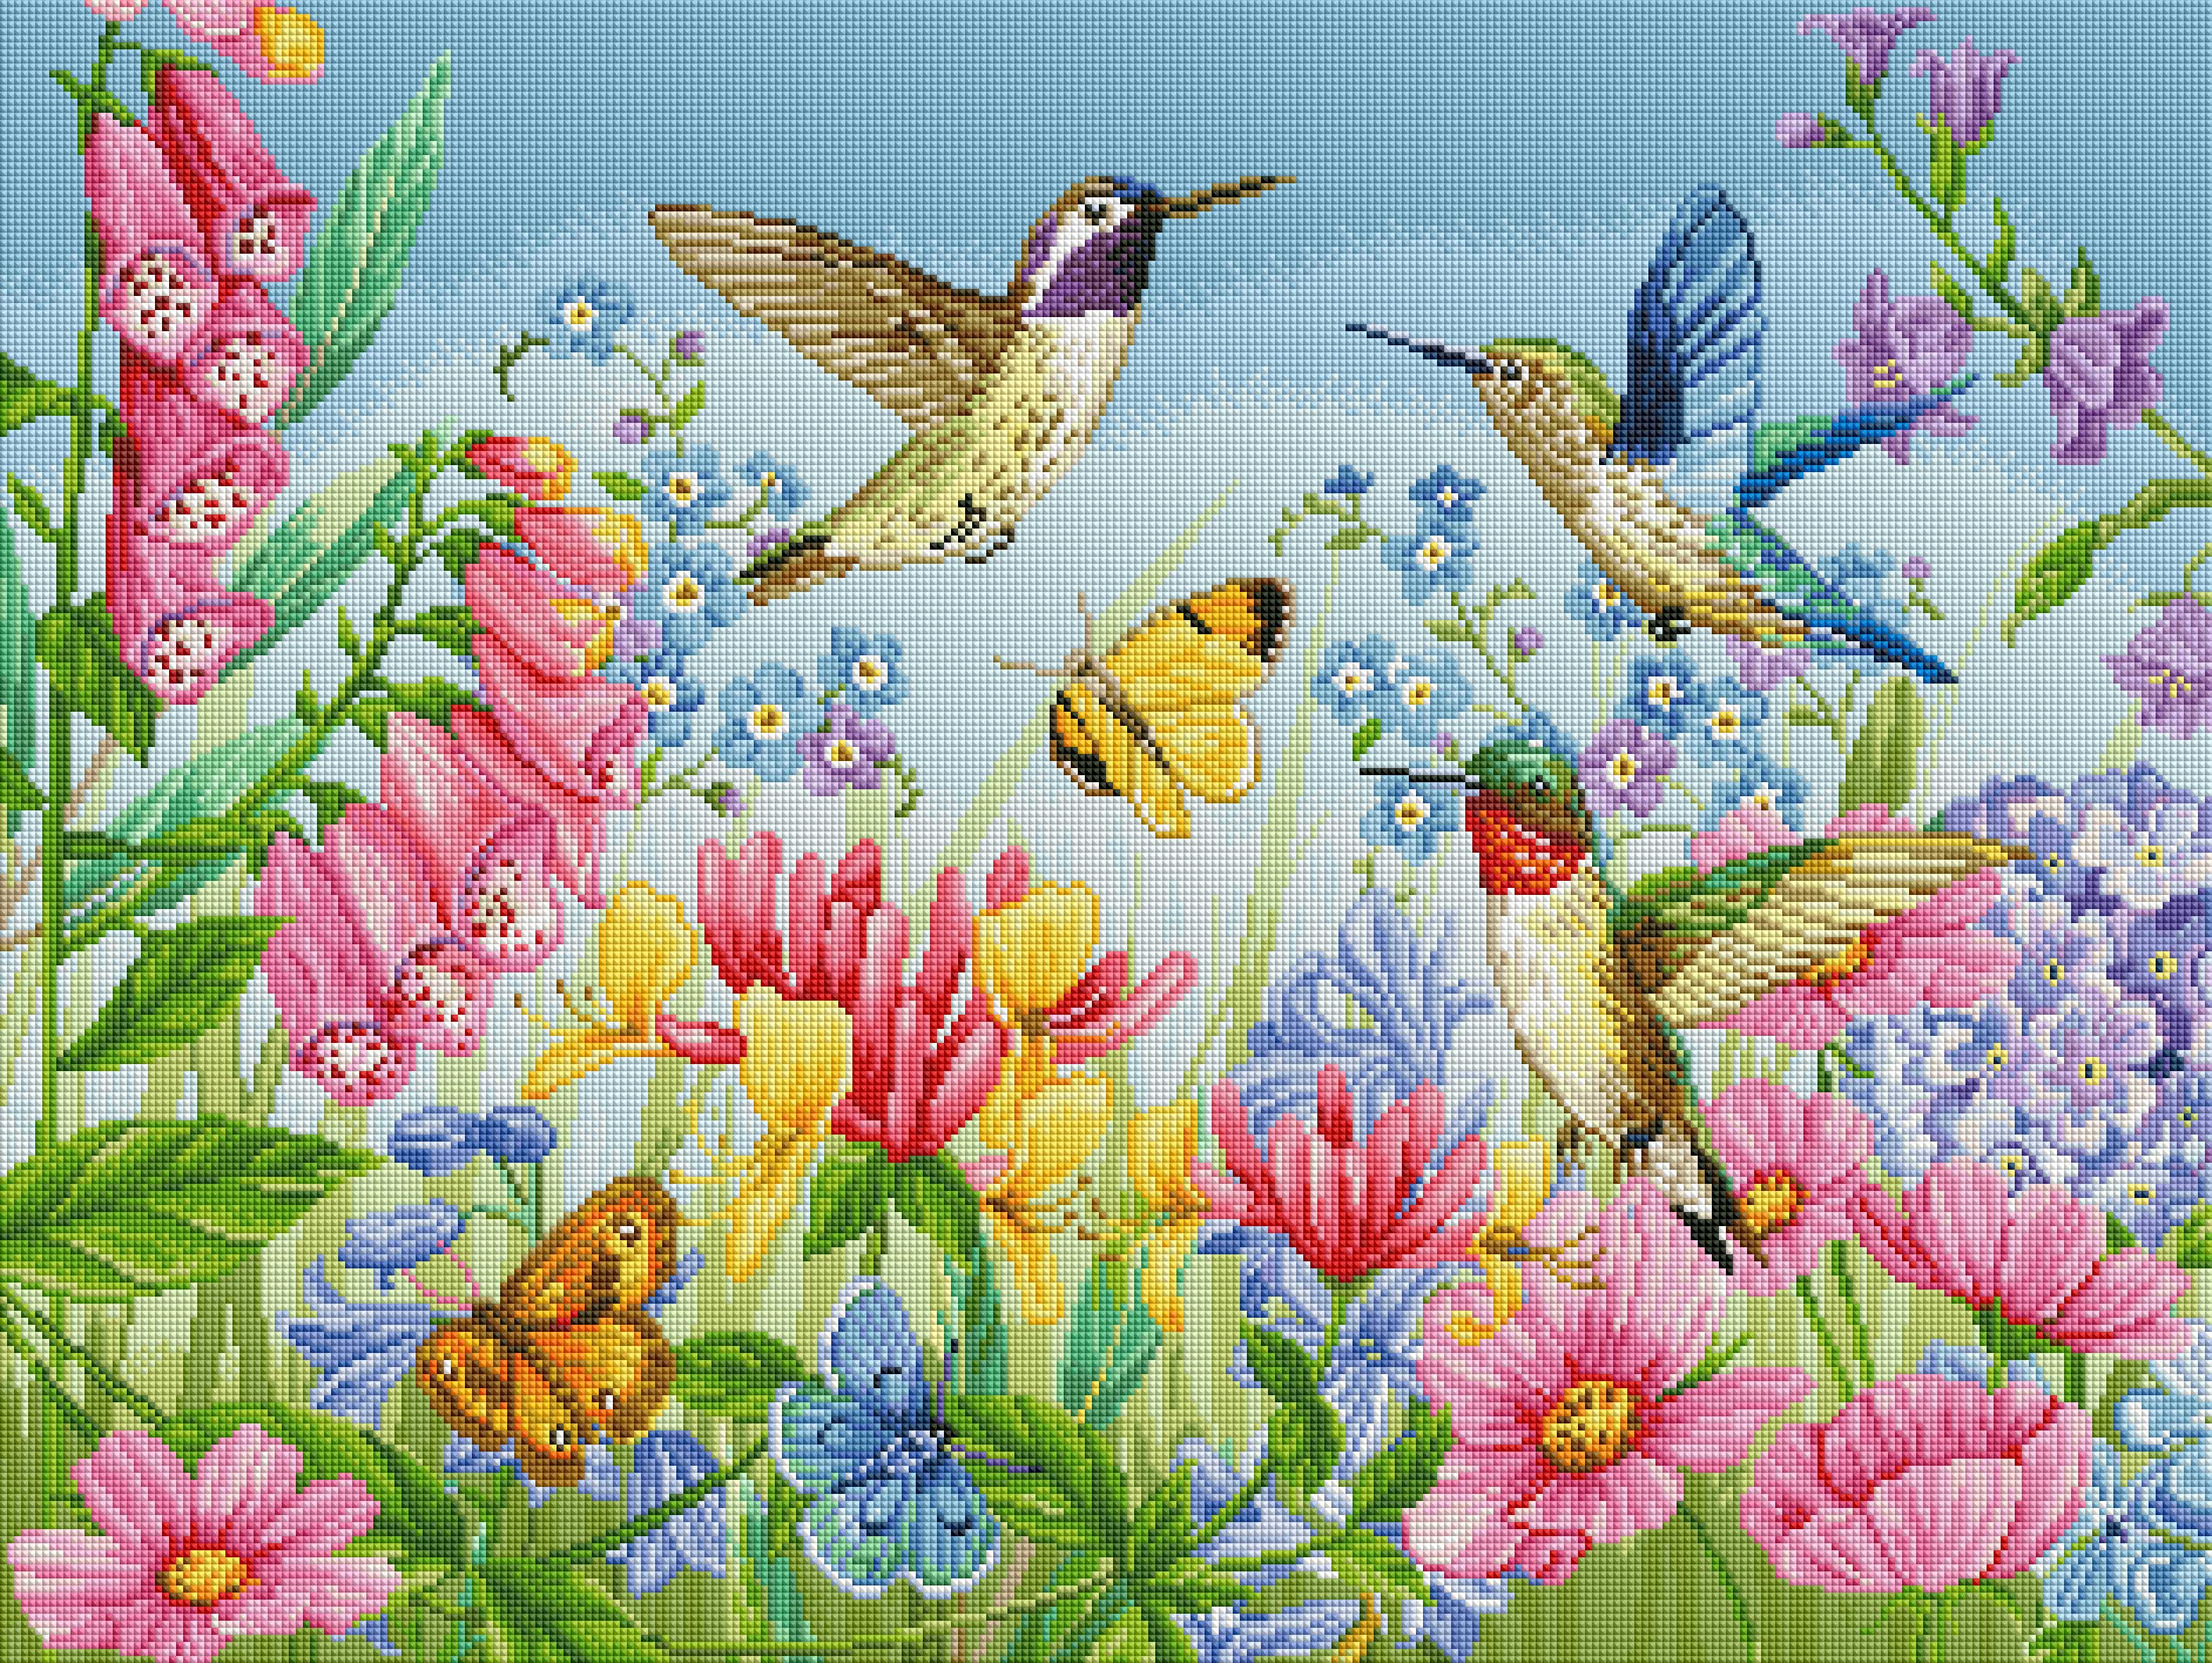 Hummingbird and Butterfly